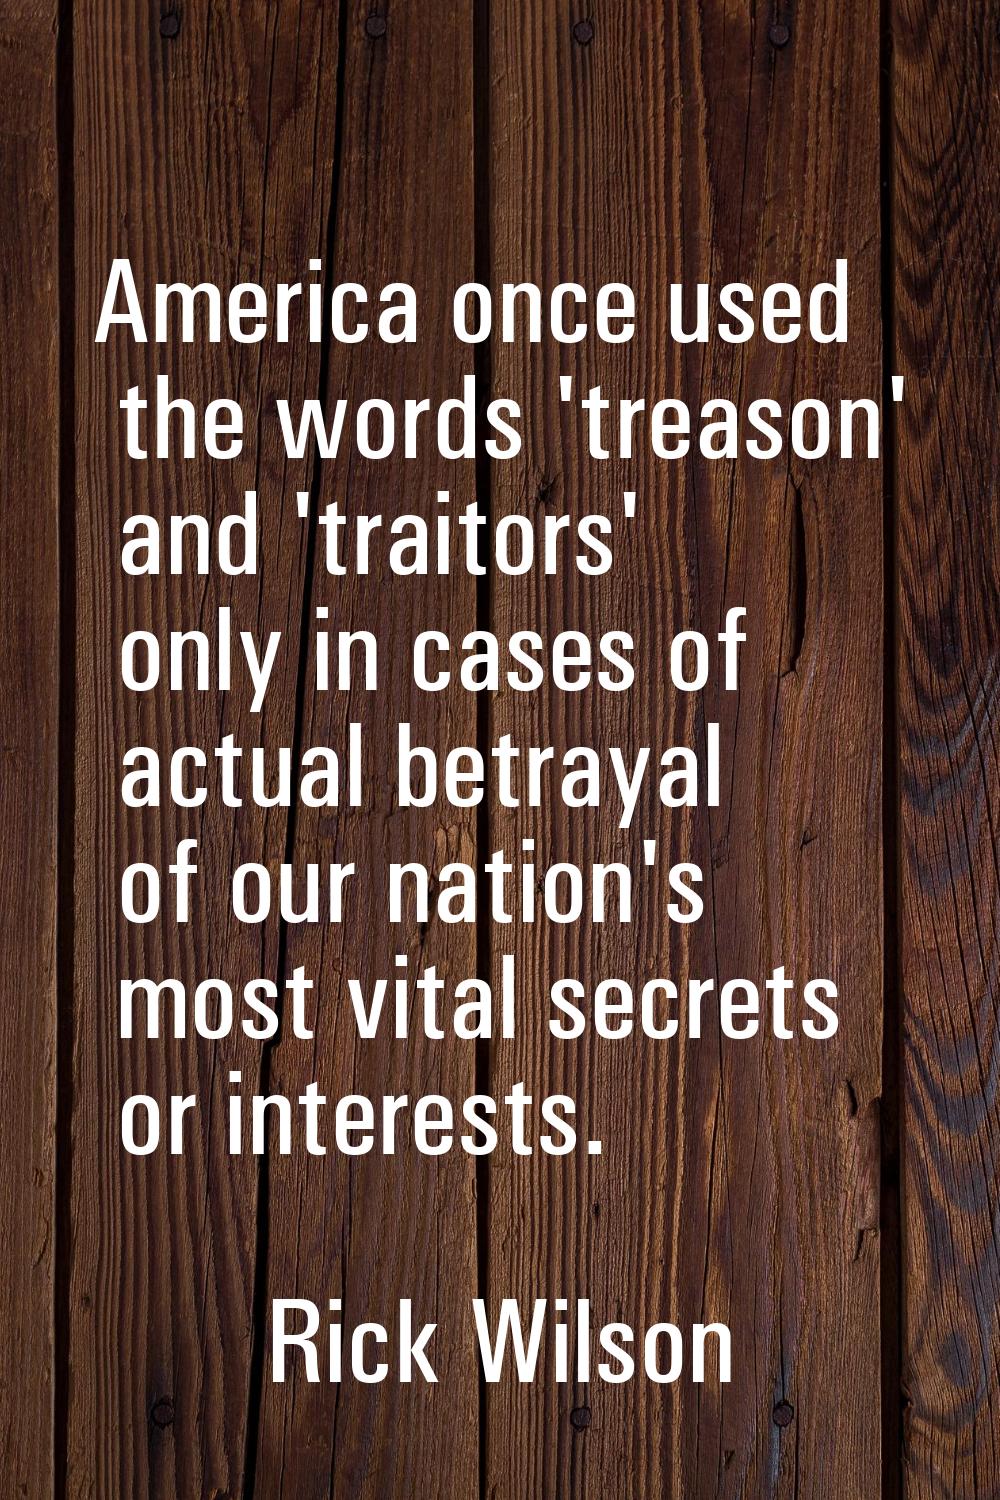 America once used the words 'treason' and 'traitors' only in cases of actual betrayal of our nation